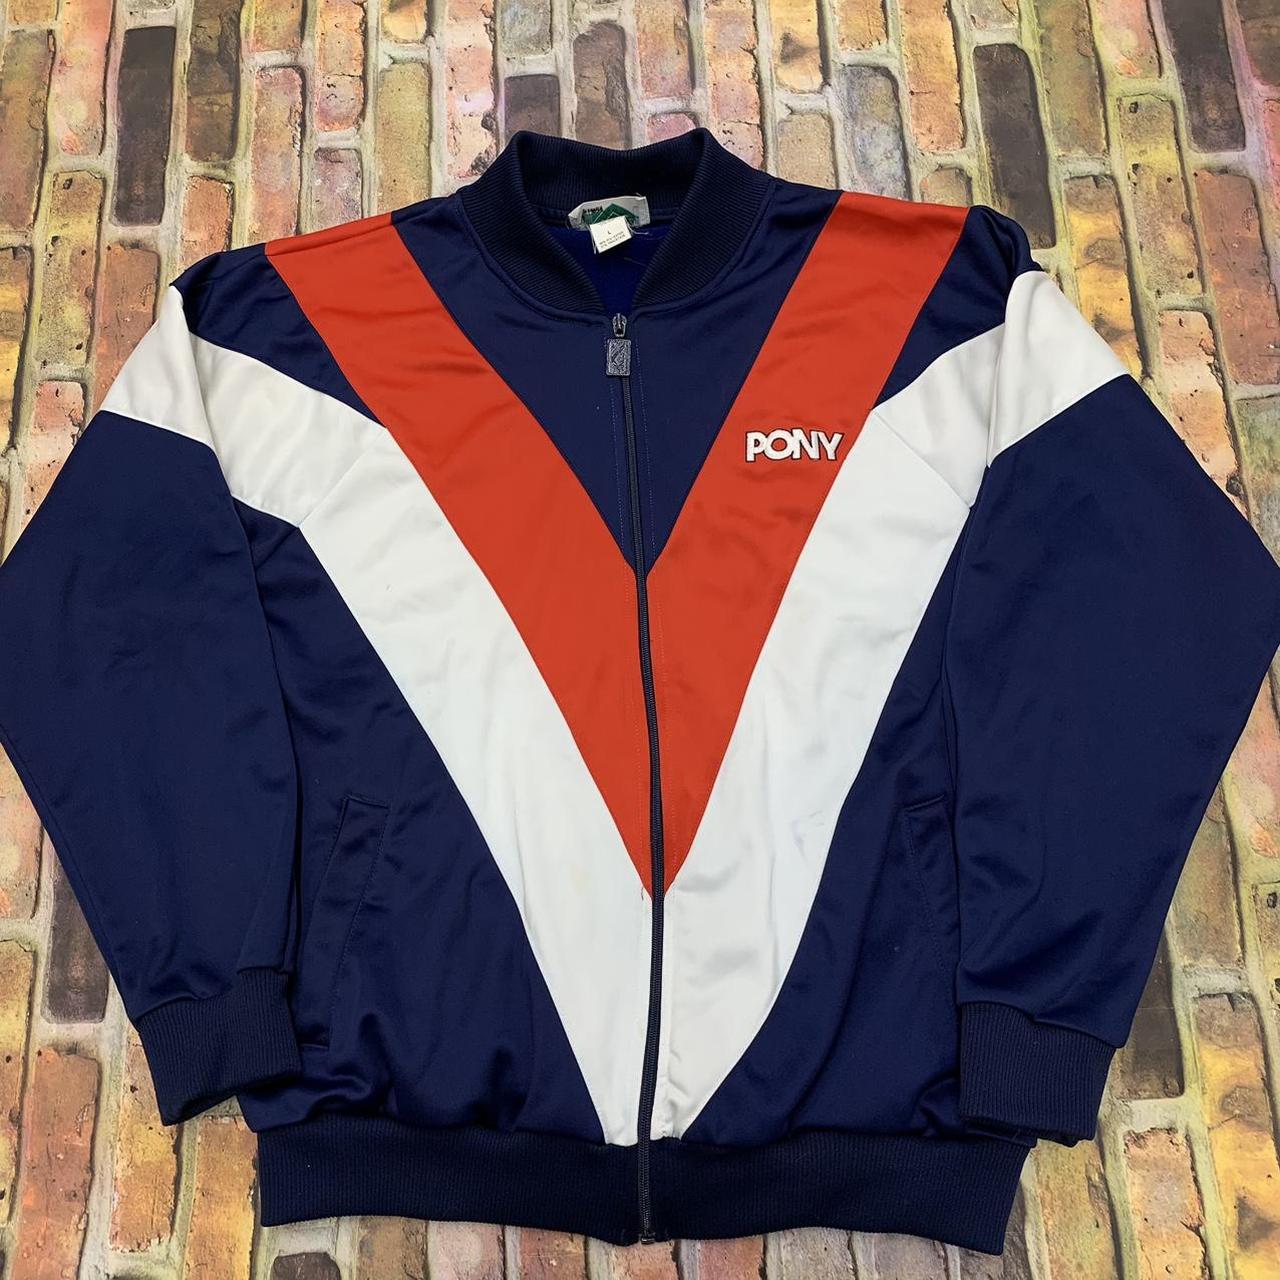 Product Image 1 - Vintage PONY track jacket. From